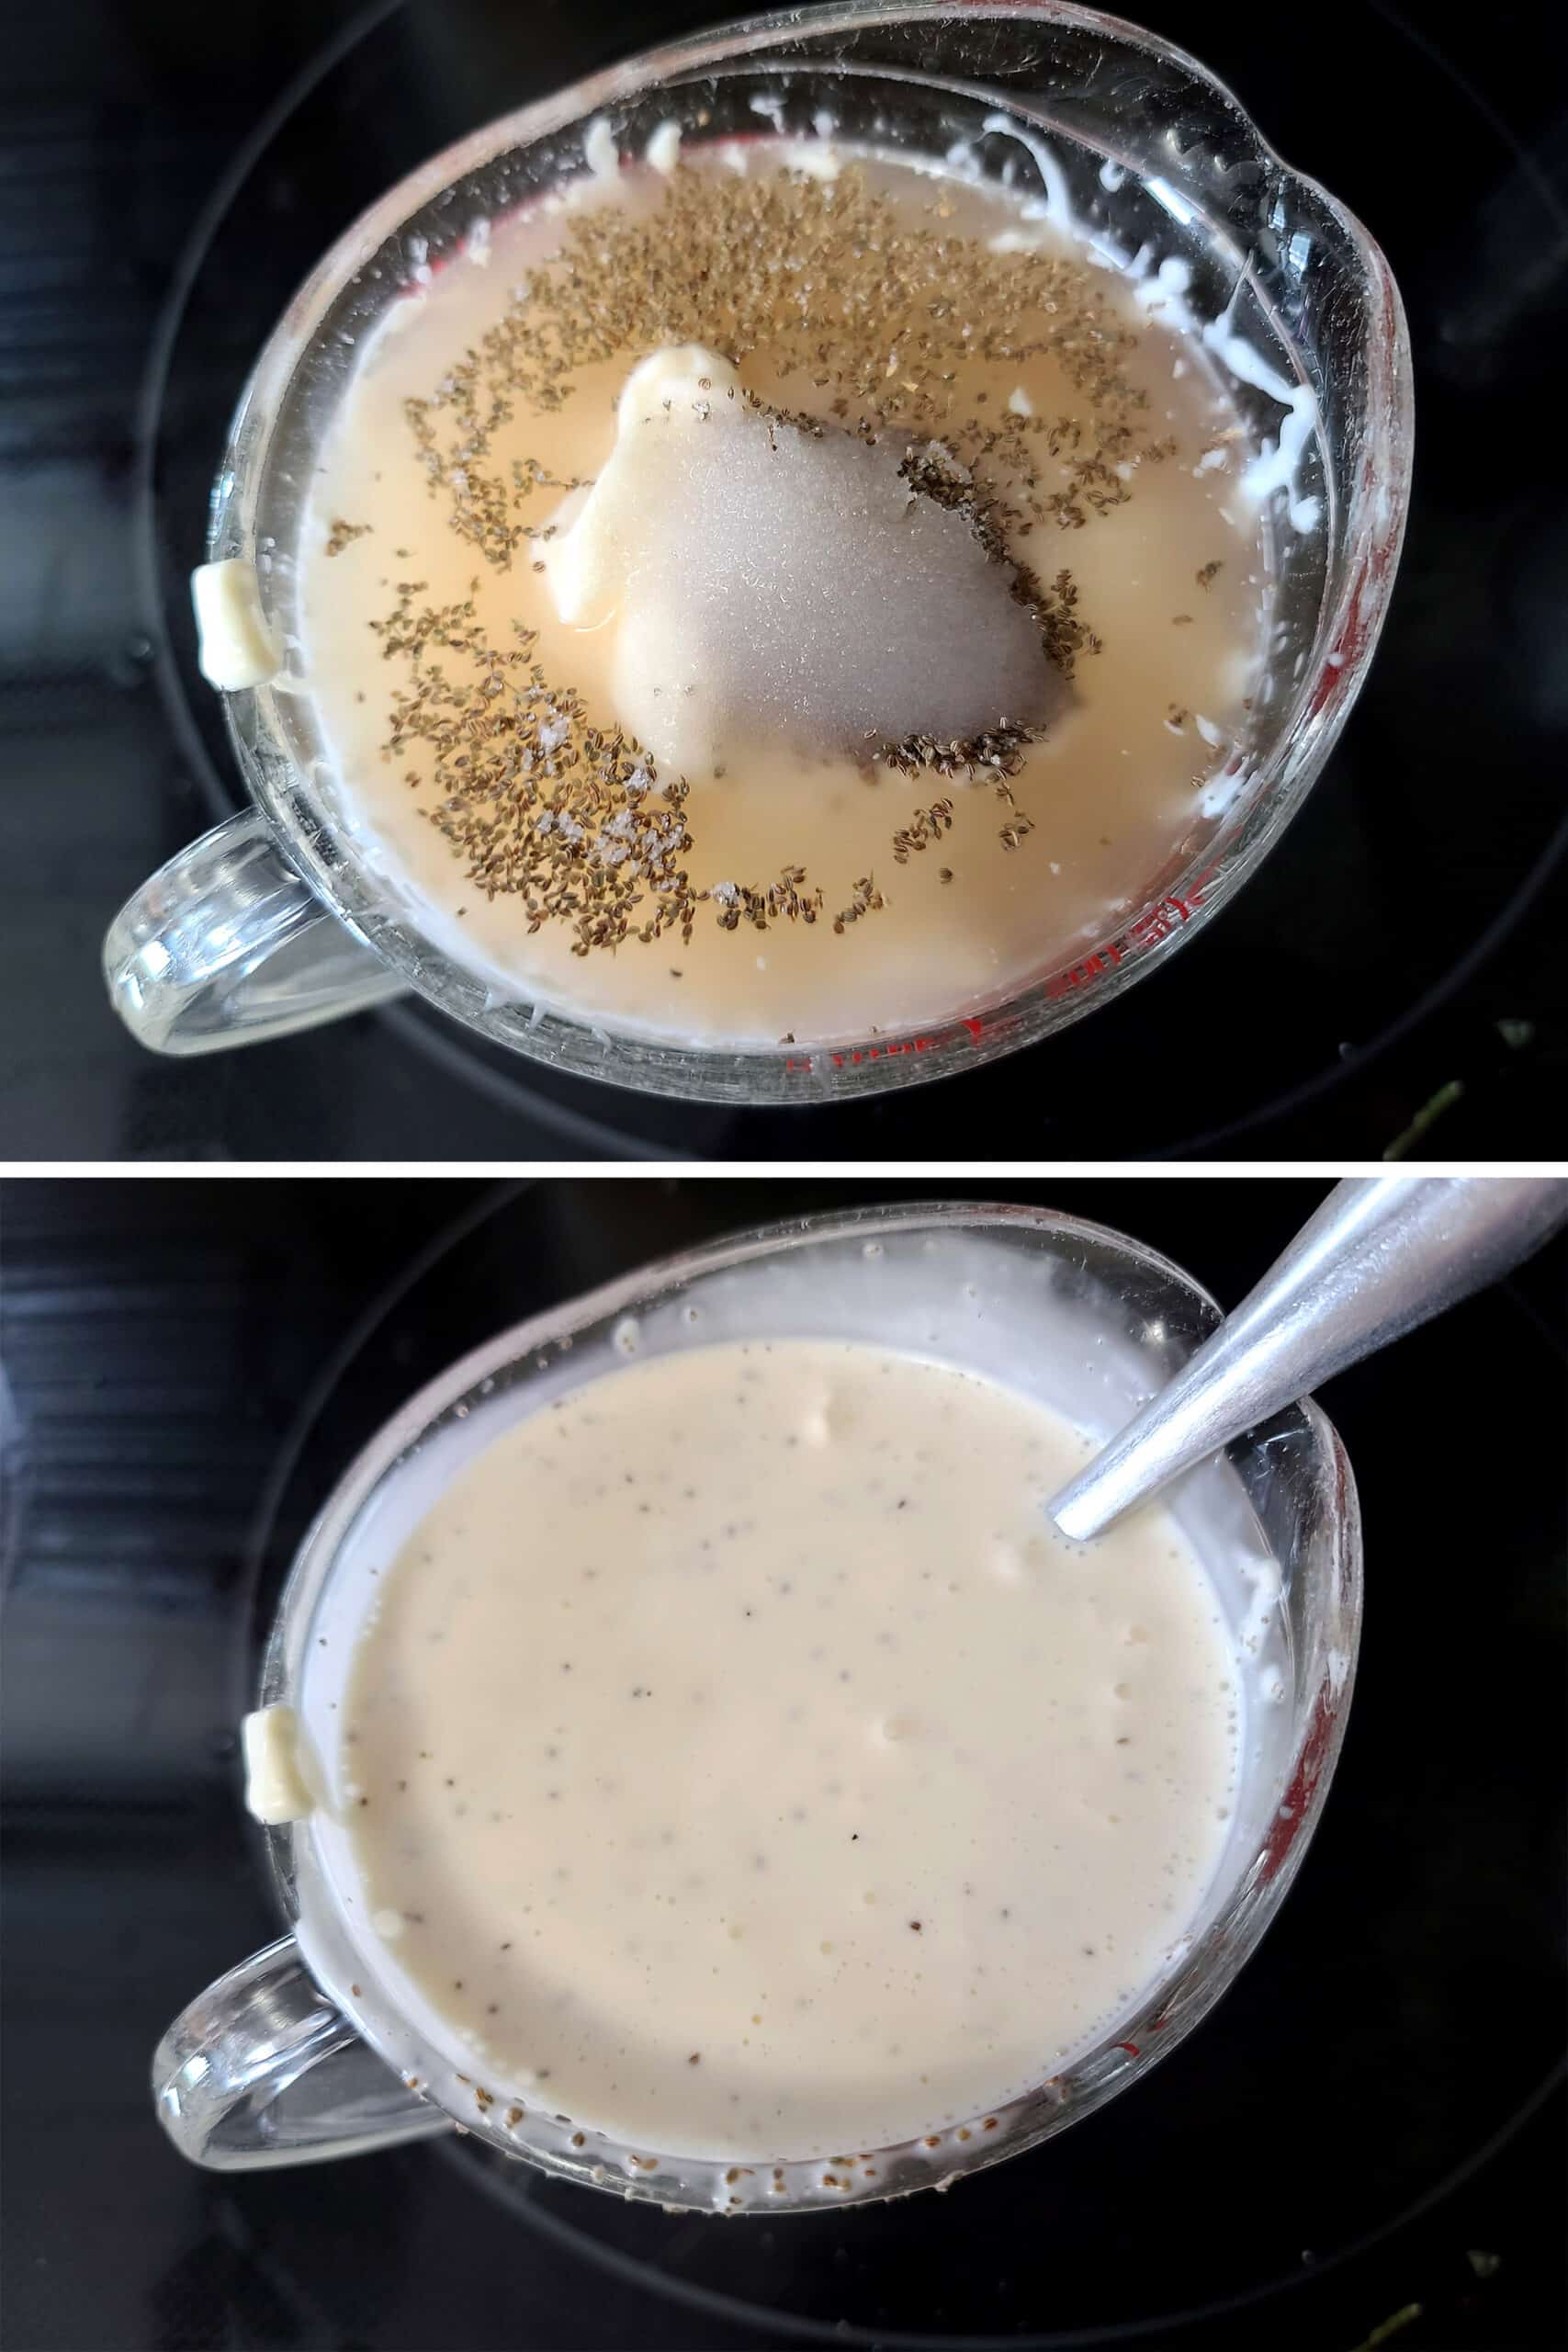 2 part image showing the salad dressing being mixed in a glass measuring cup.